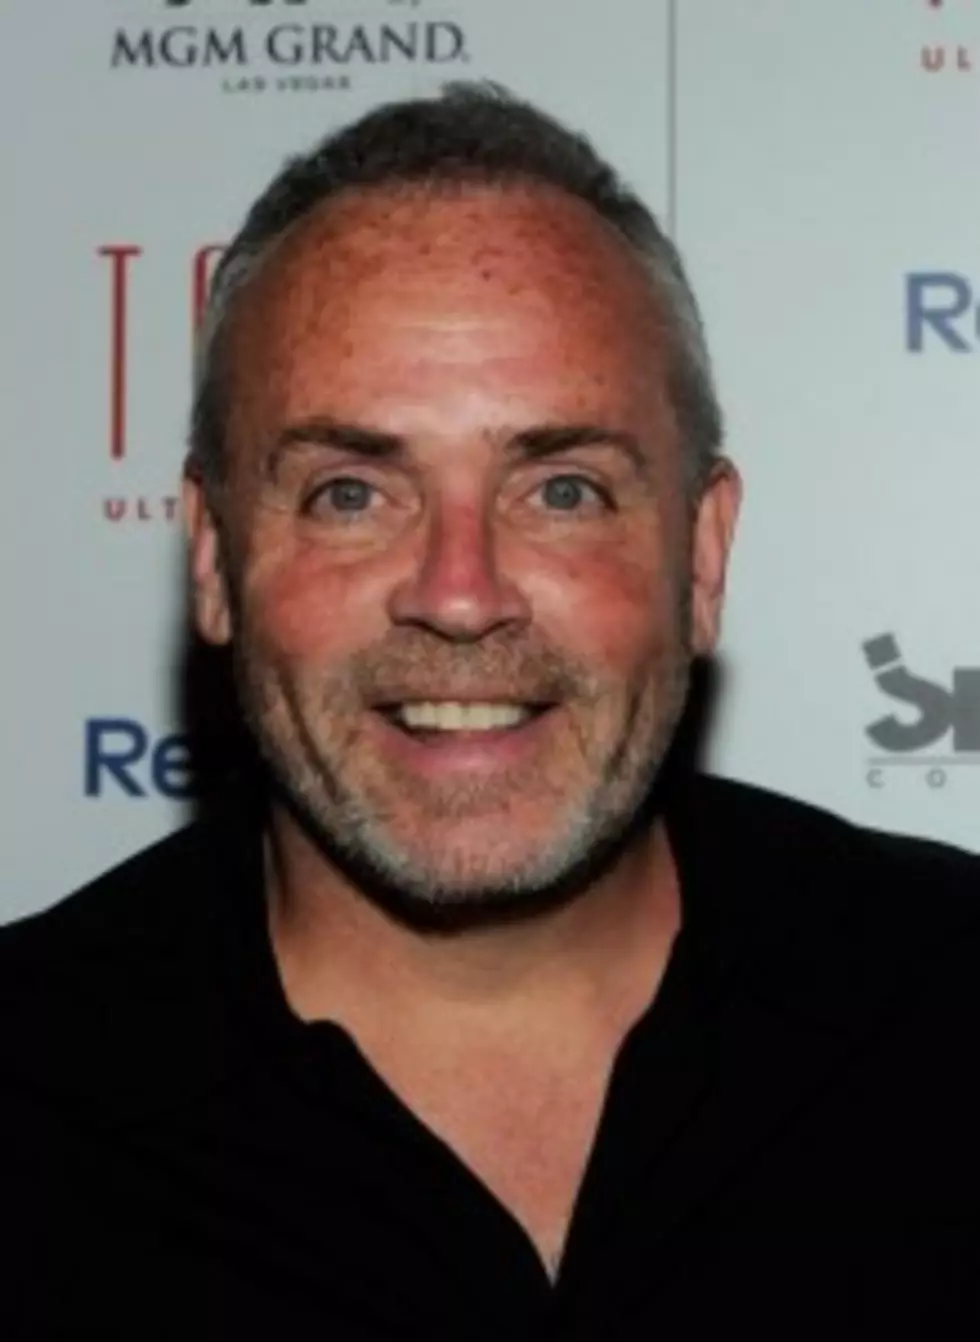 What Hot Wings Thinks &#8211; Richard Hatch Is An A-Hole [AUDIO]